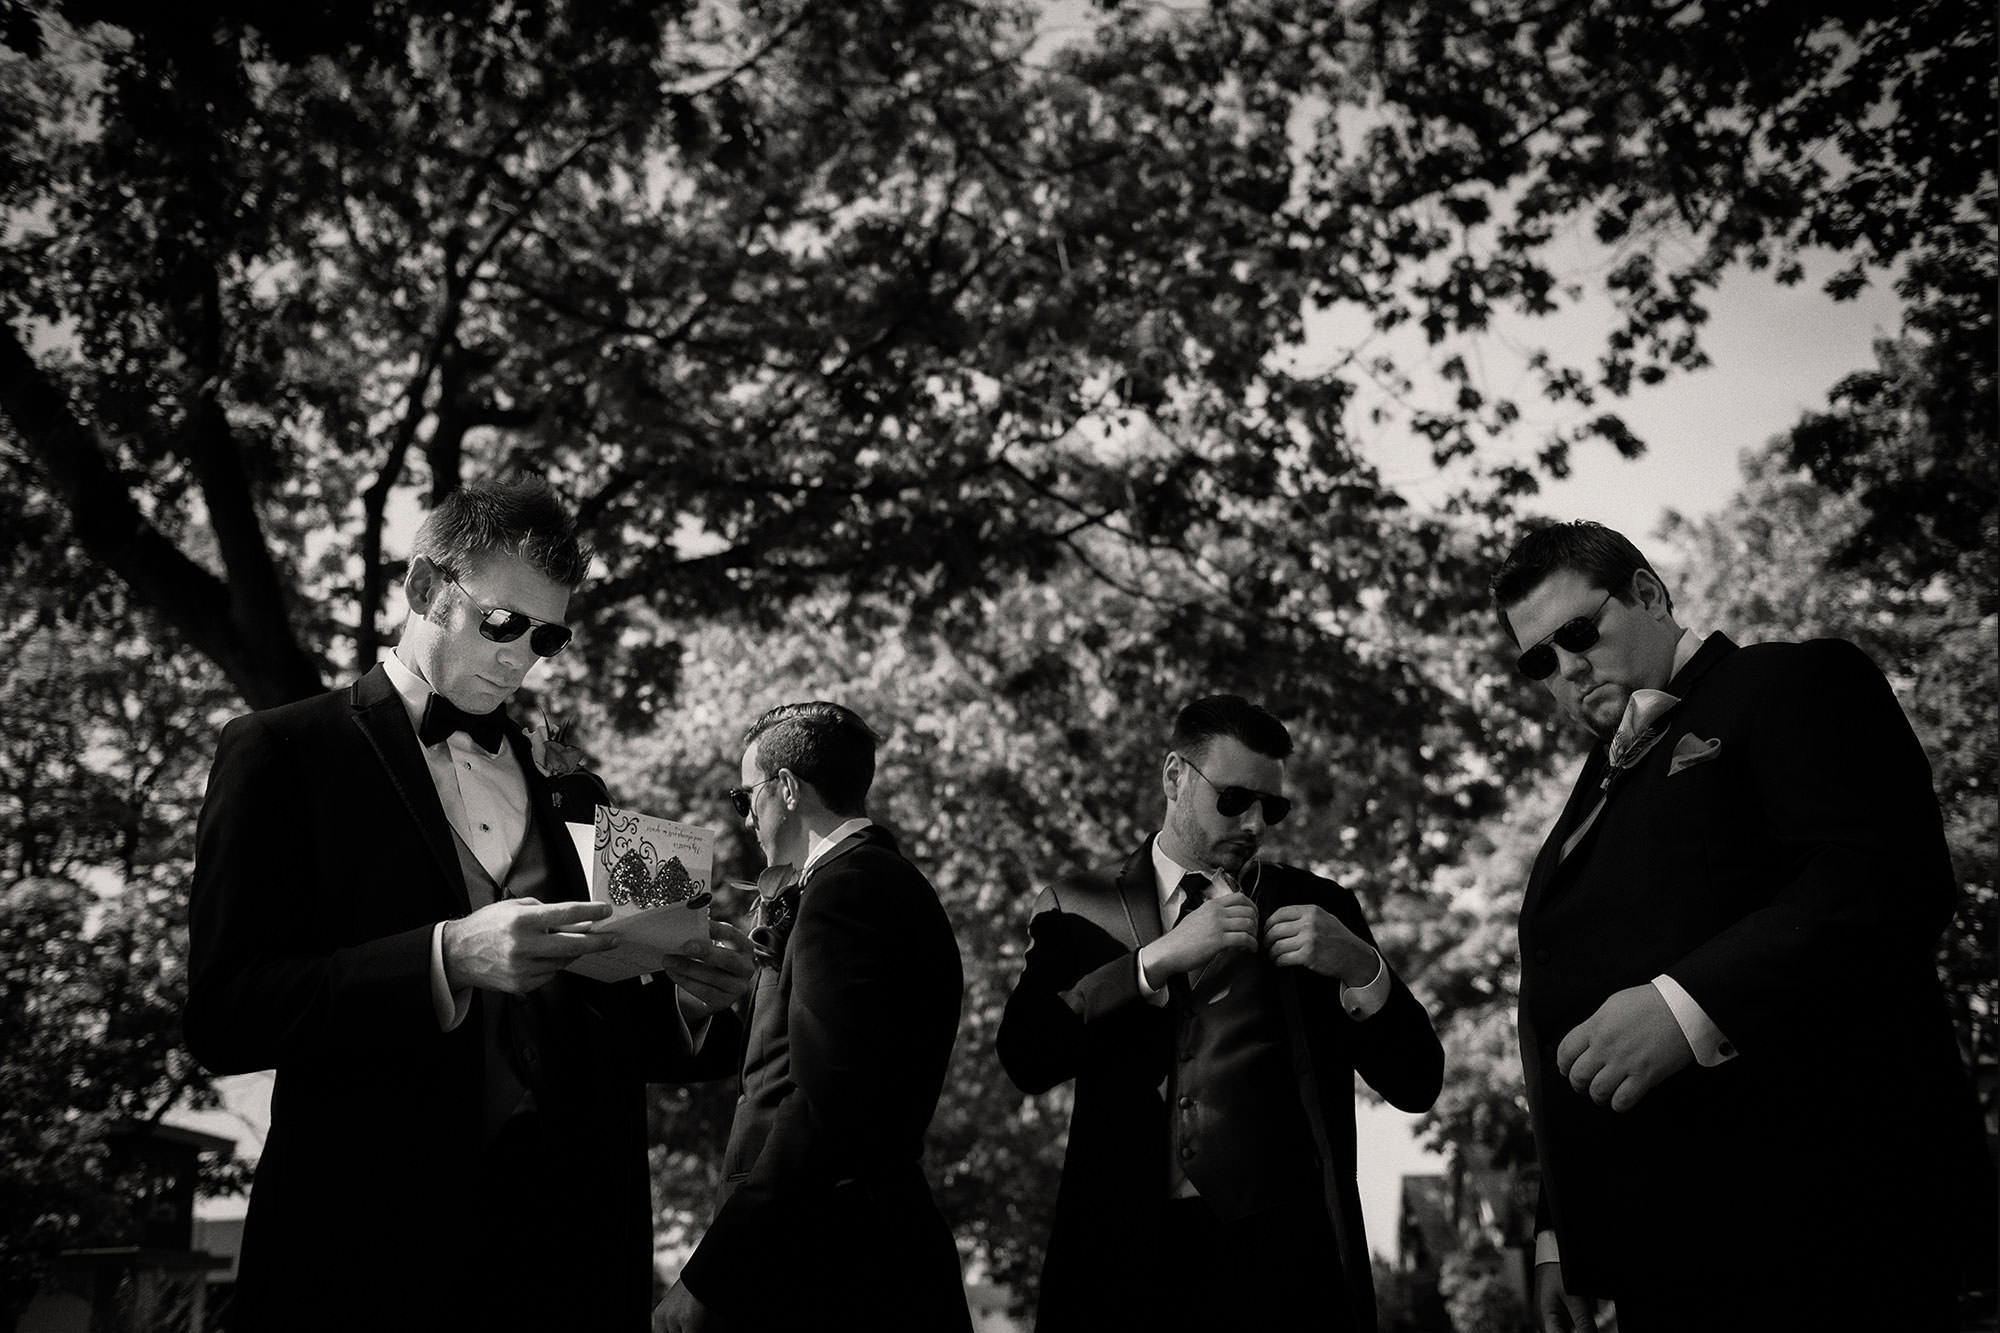 Well-dressed men in suits B&W